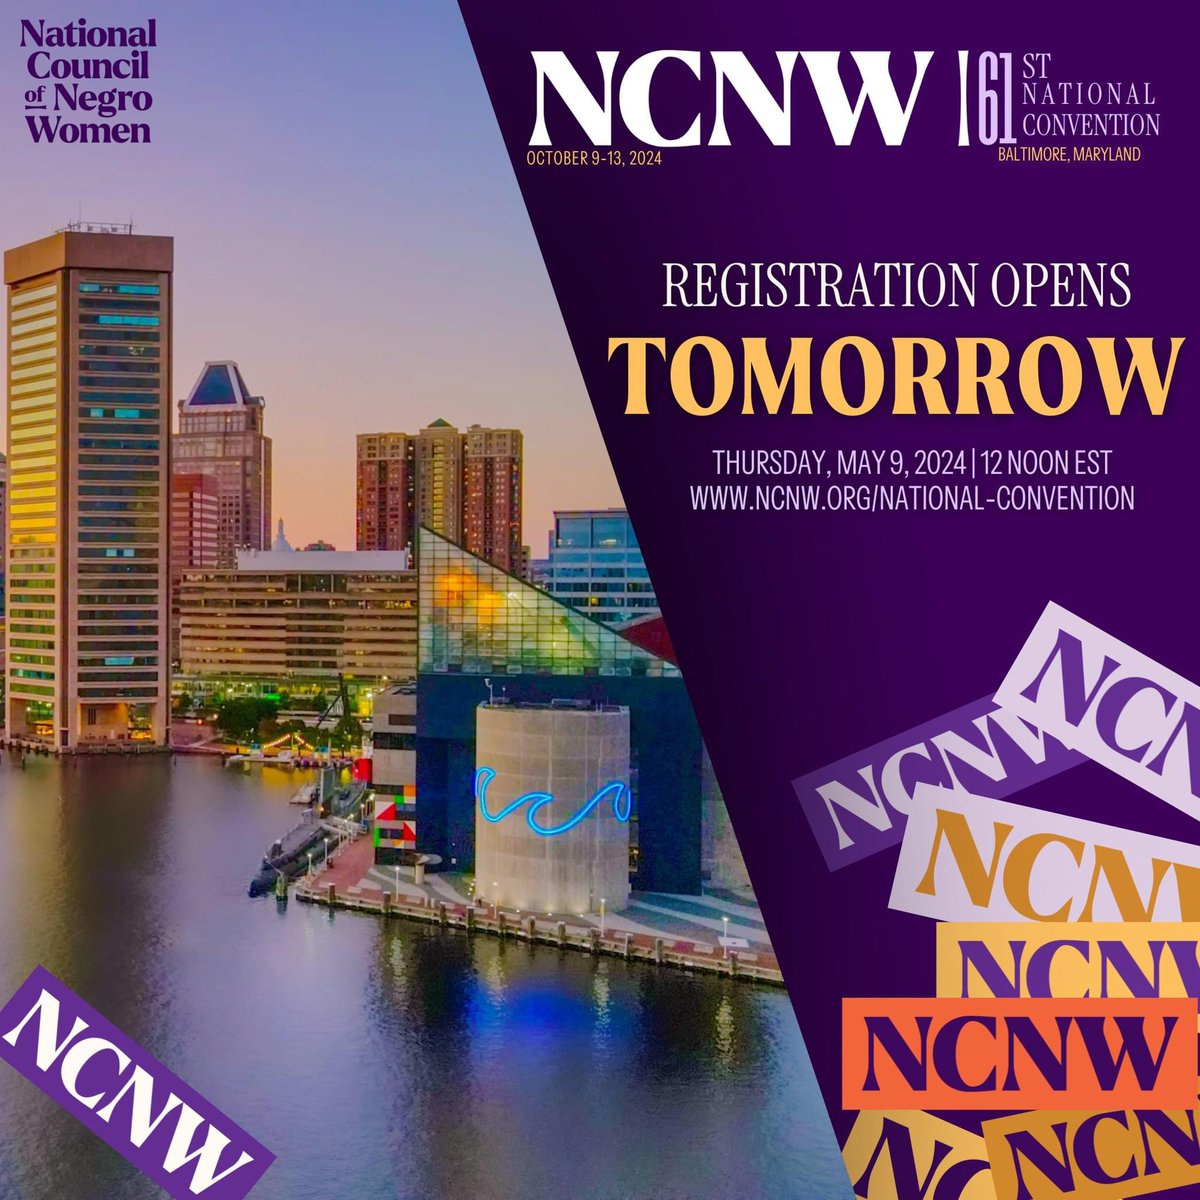 Tomorrow registration officially opens for our 61st National Convention! Be ready to secure your spot and stay tuned for more details. #NCNWStrong🟣